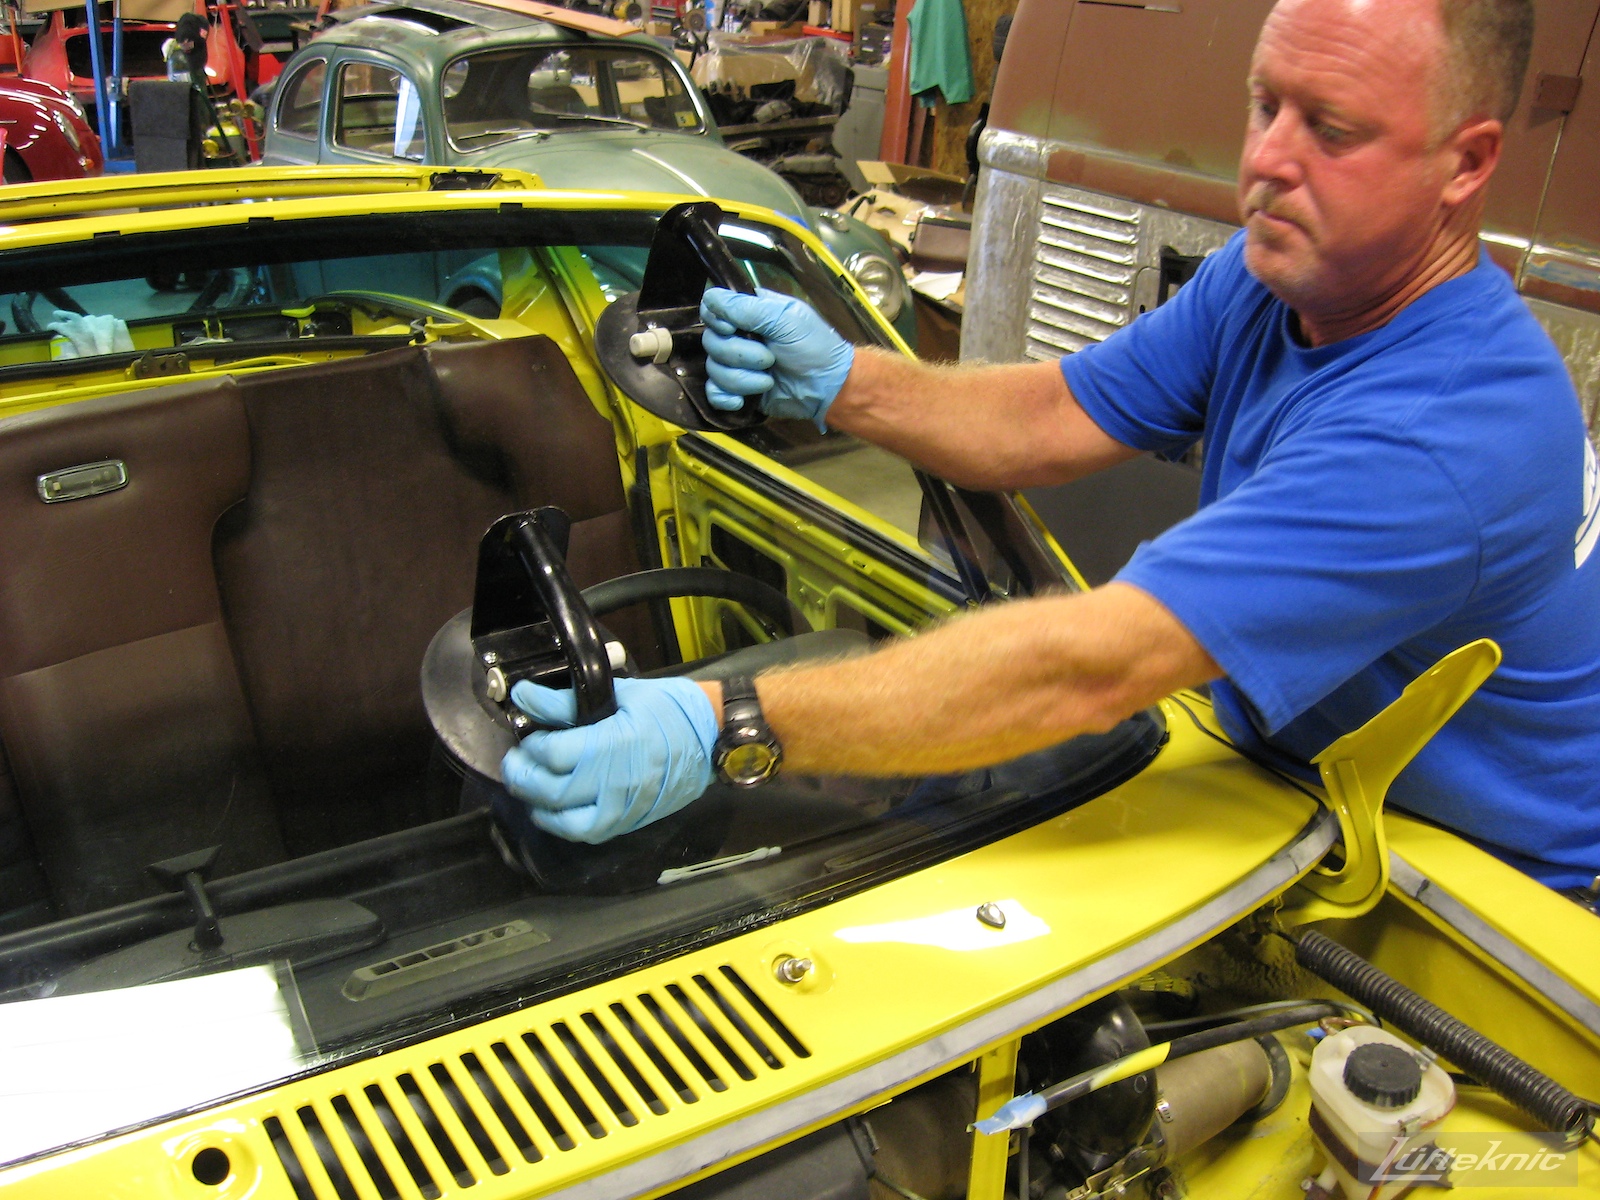 Installing the windshield into a restored yellow Porsche 914 at Lufteknic.